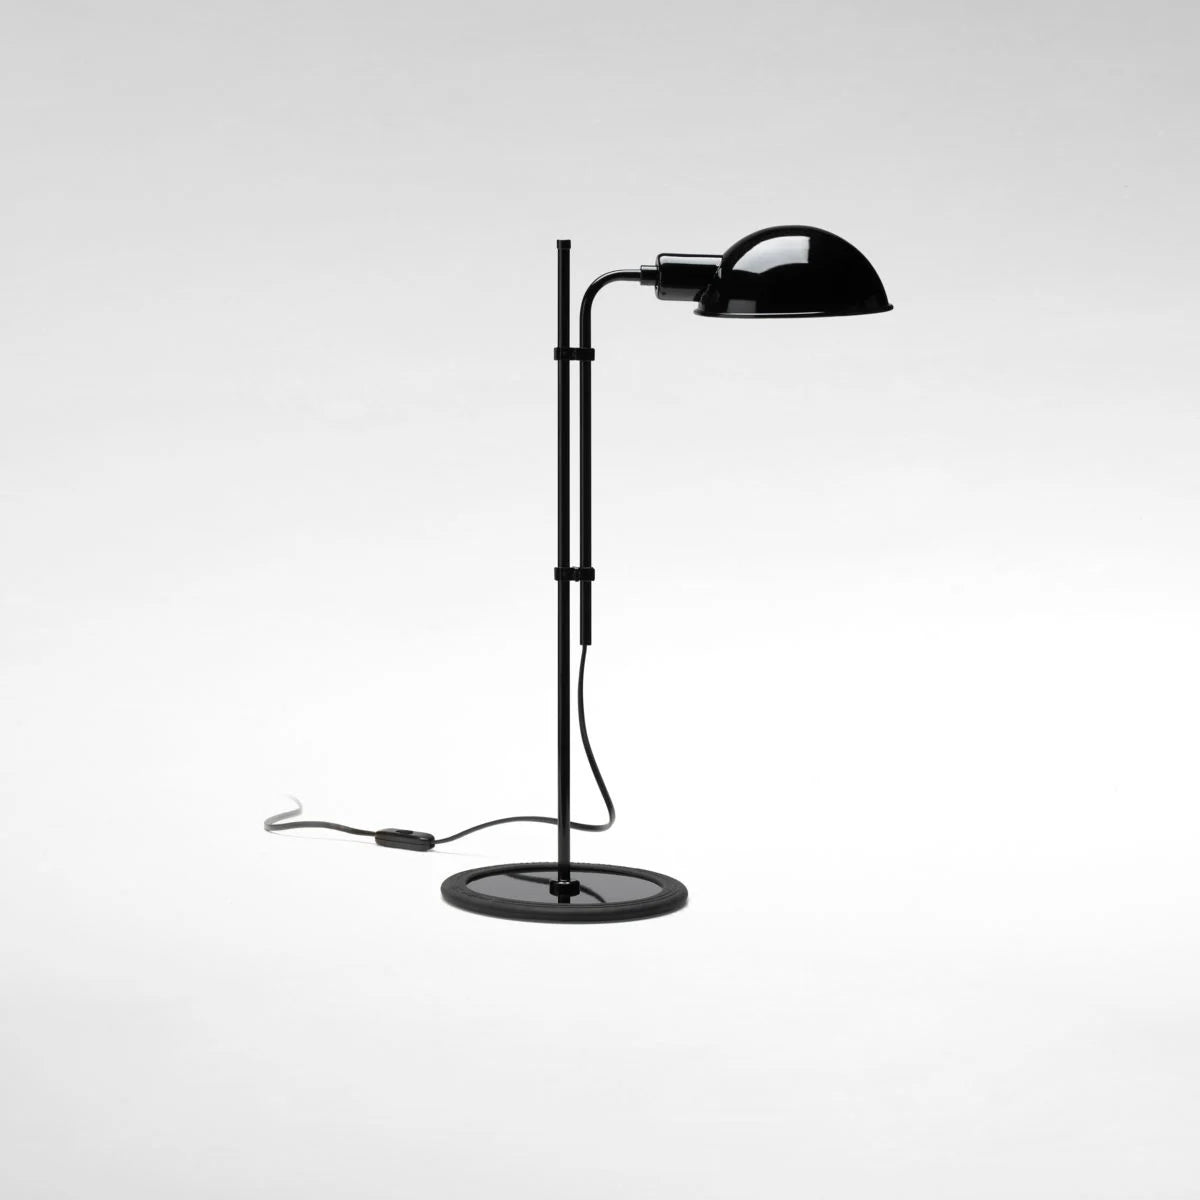 Black industrial style white adjustable Table lamp for bedroom reading area, study room by Marset